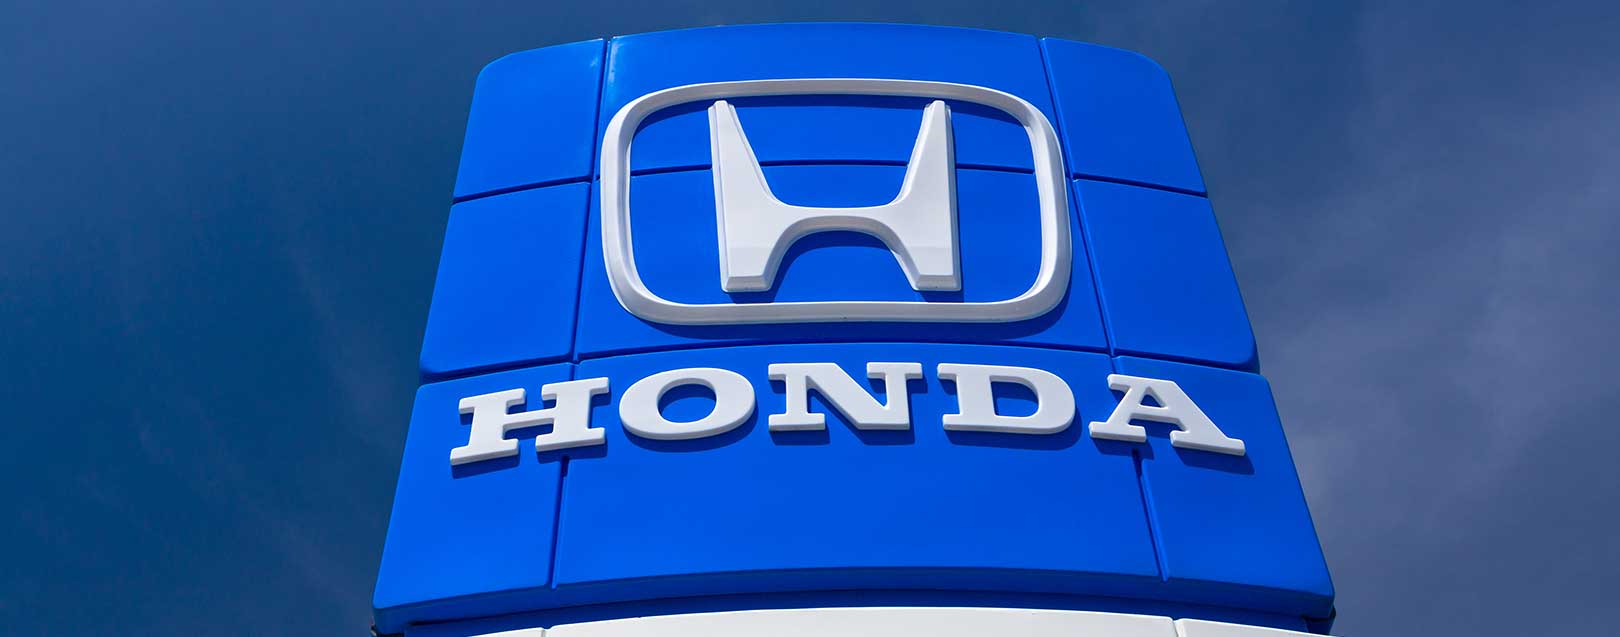 Honda Cars keen to strengthen brand in India 